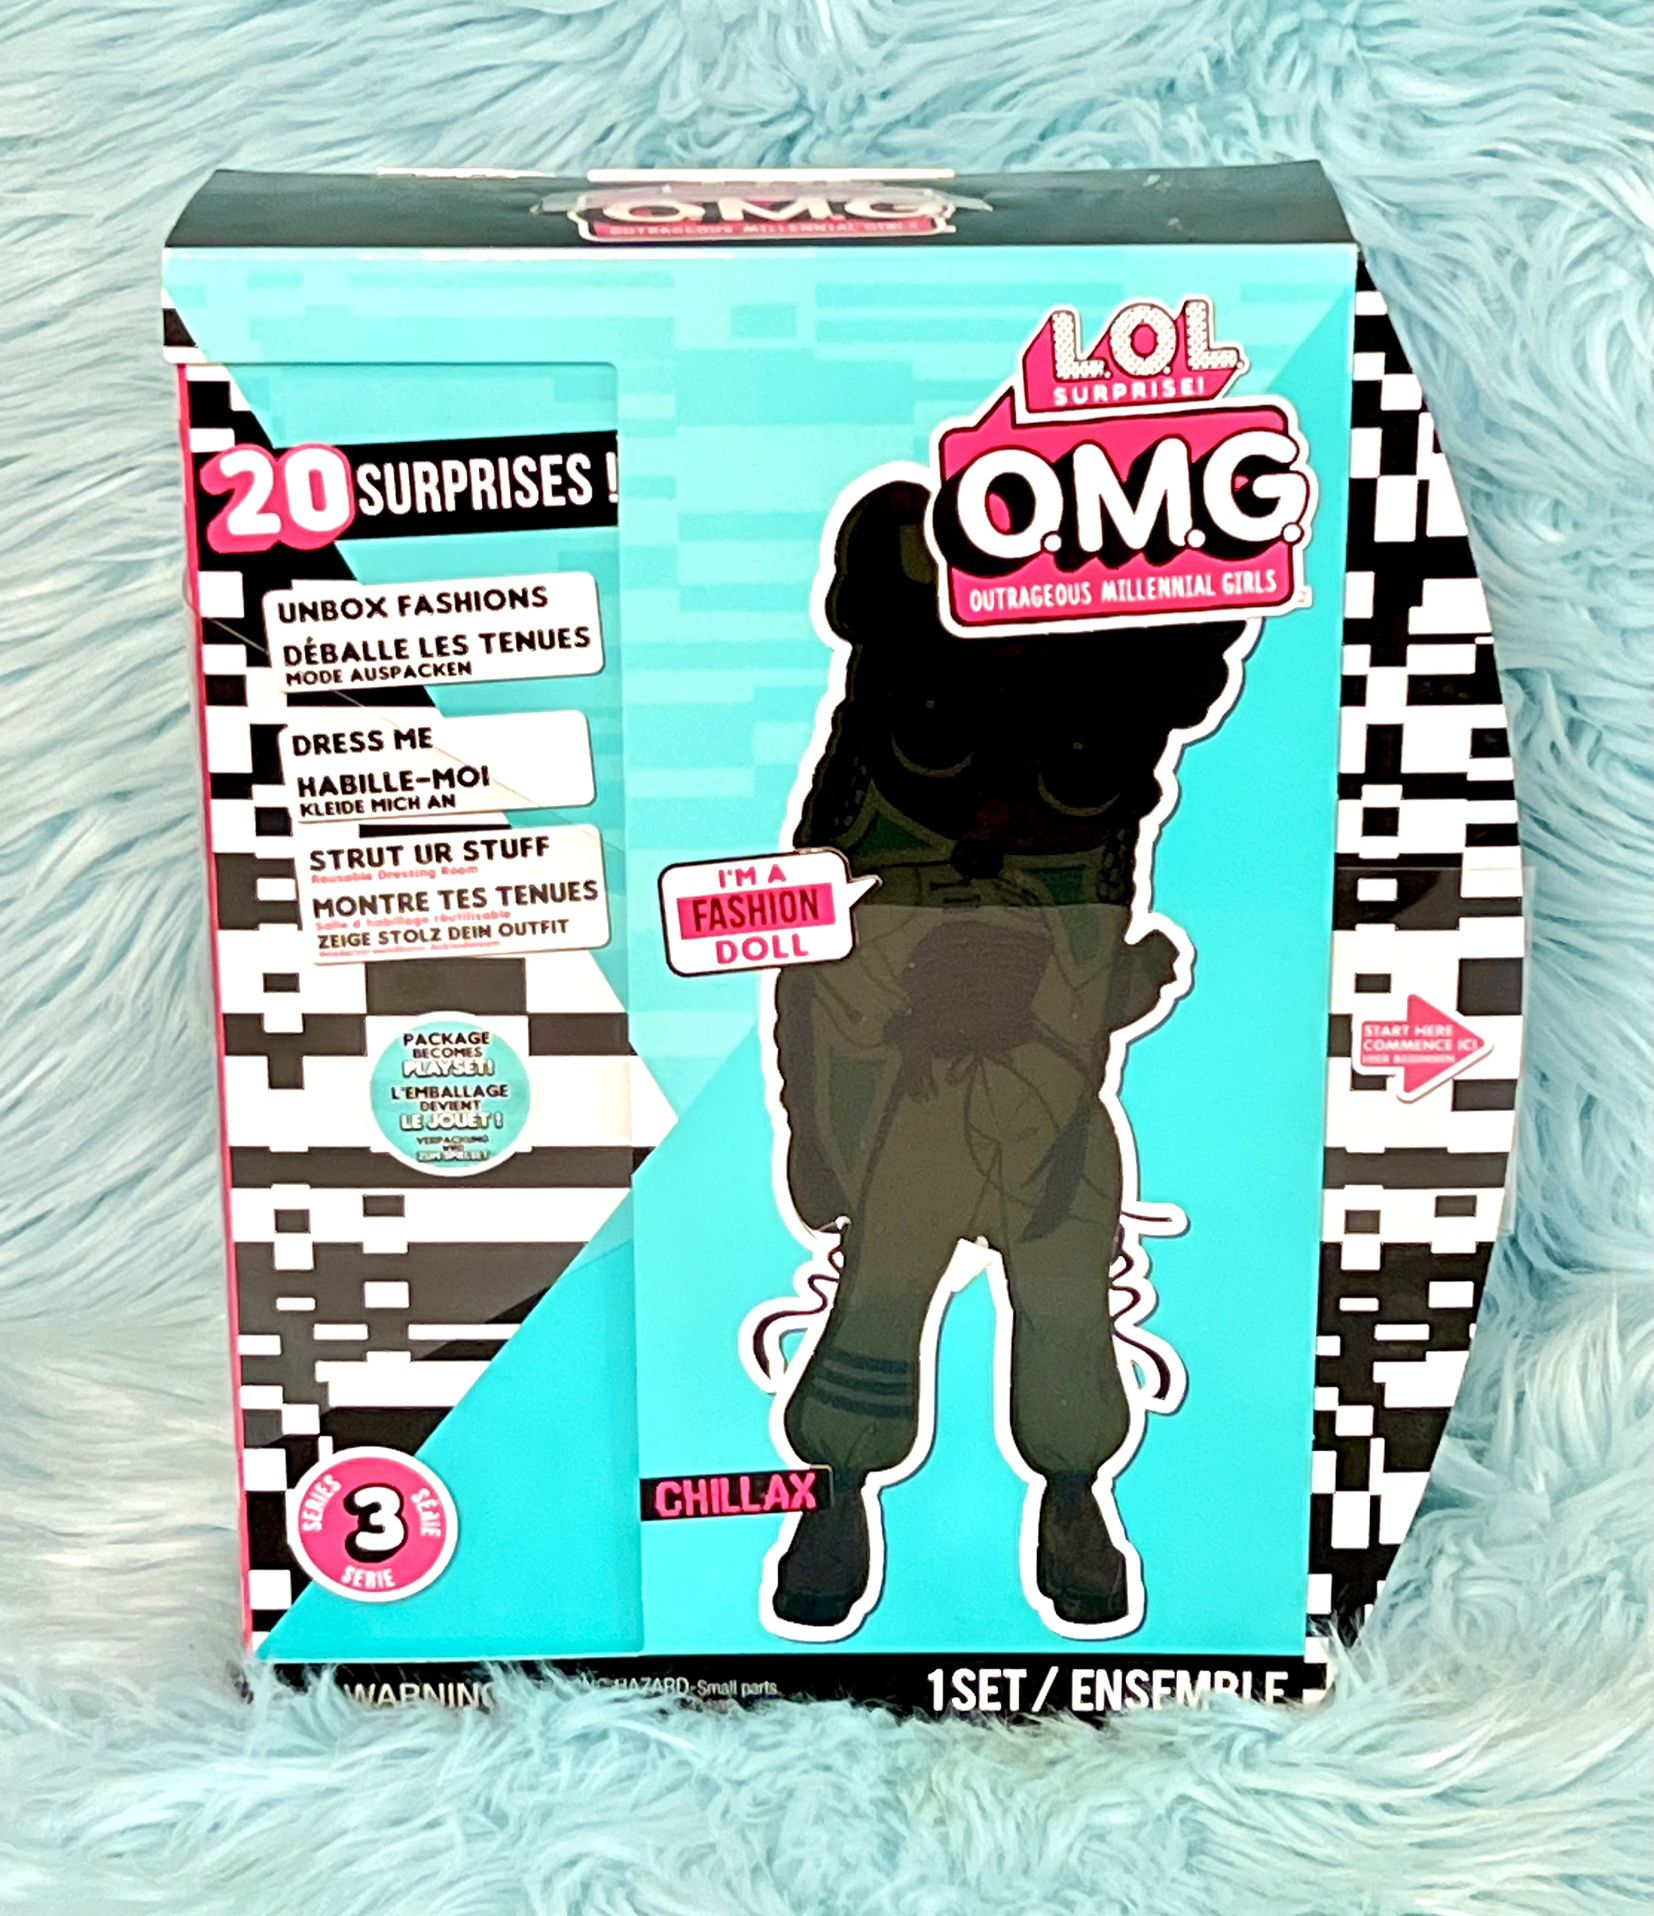 LOL Surprise! OMG Series 3 Chillax Fashion Doll with 20 Surprises - Brand New!